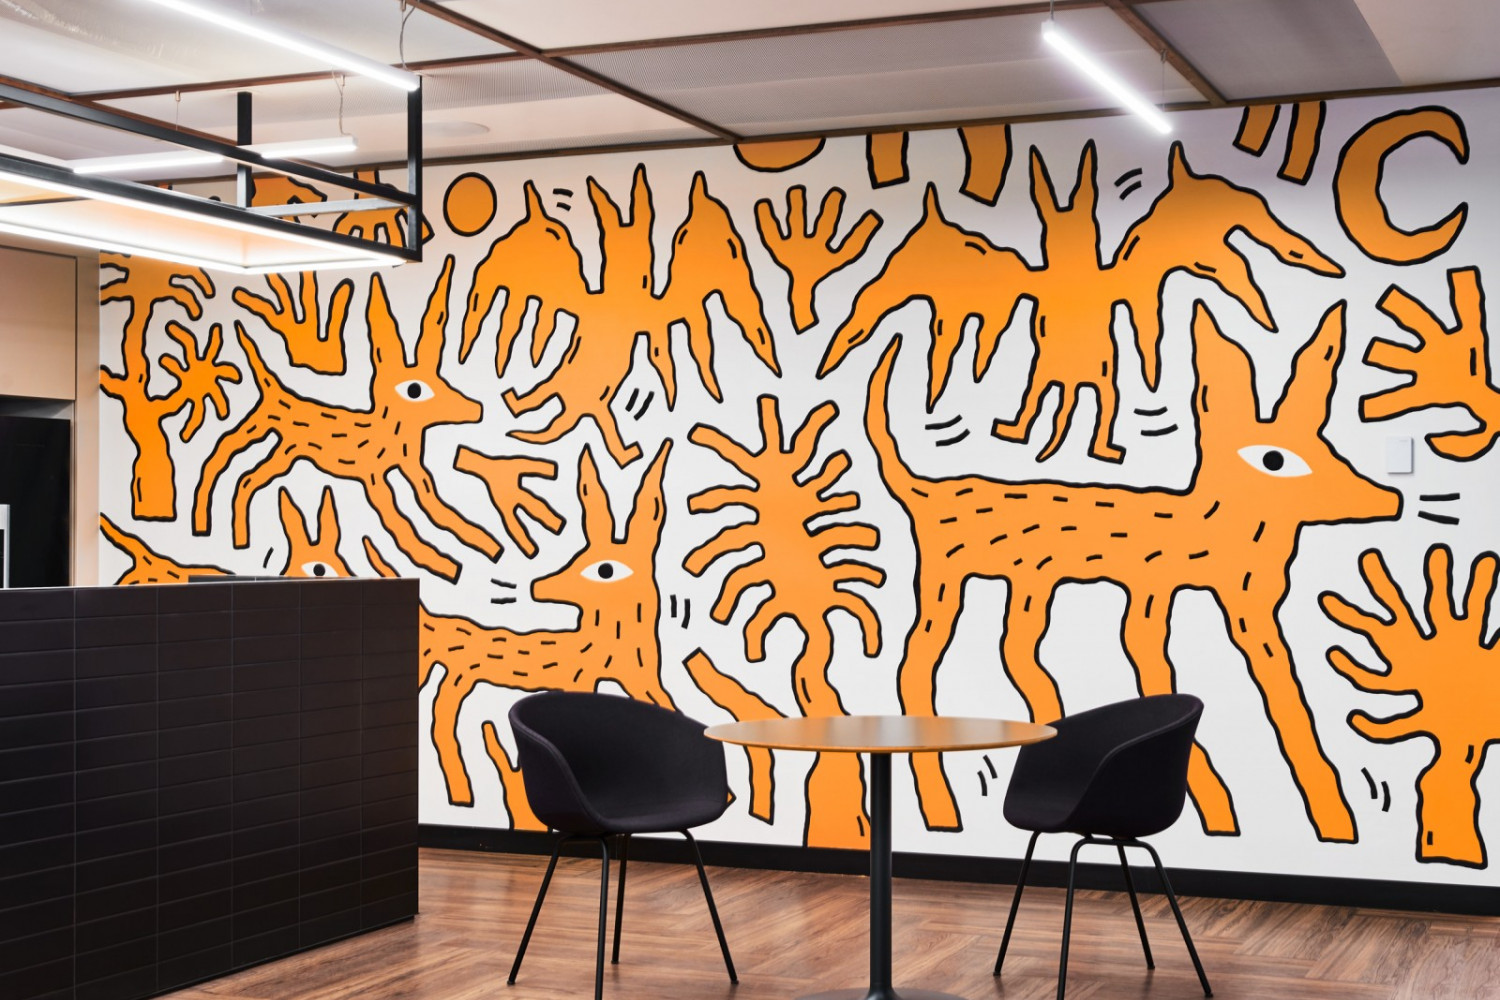 Minna Leunig mural piece, one of the 12 murals across 10 staff floors, in Deloitte's Melbourne office, July 2020. Photo by Rochelle Eagle